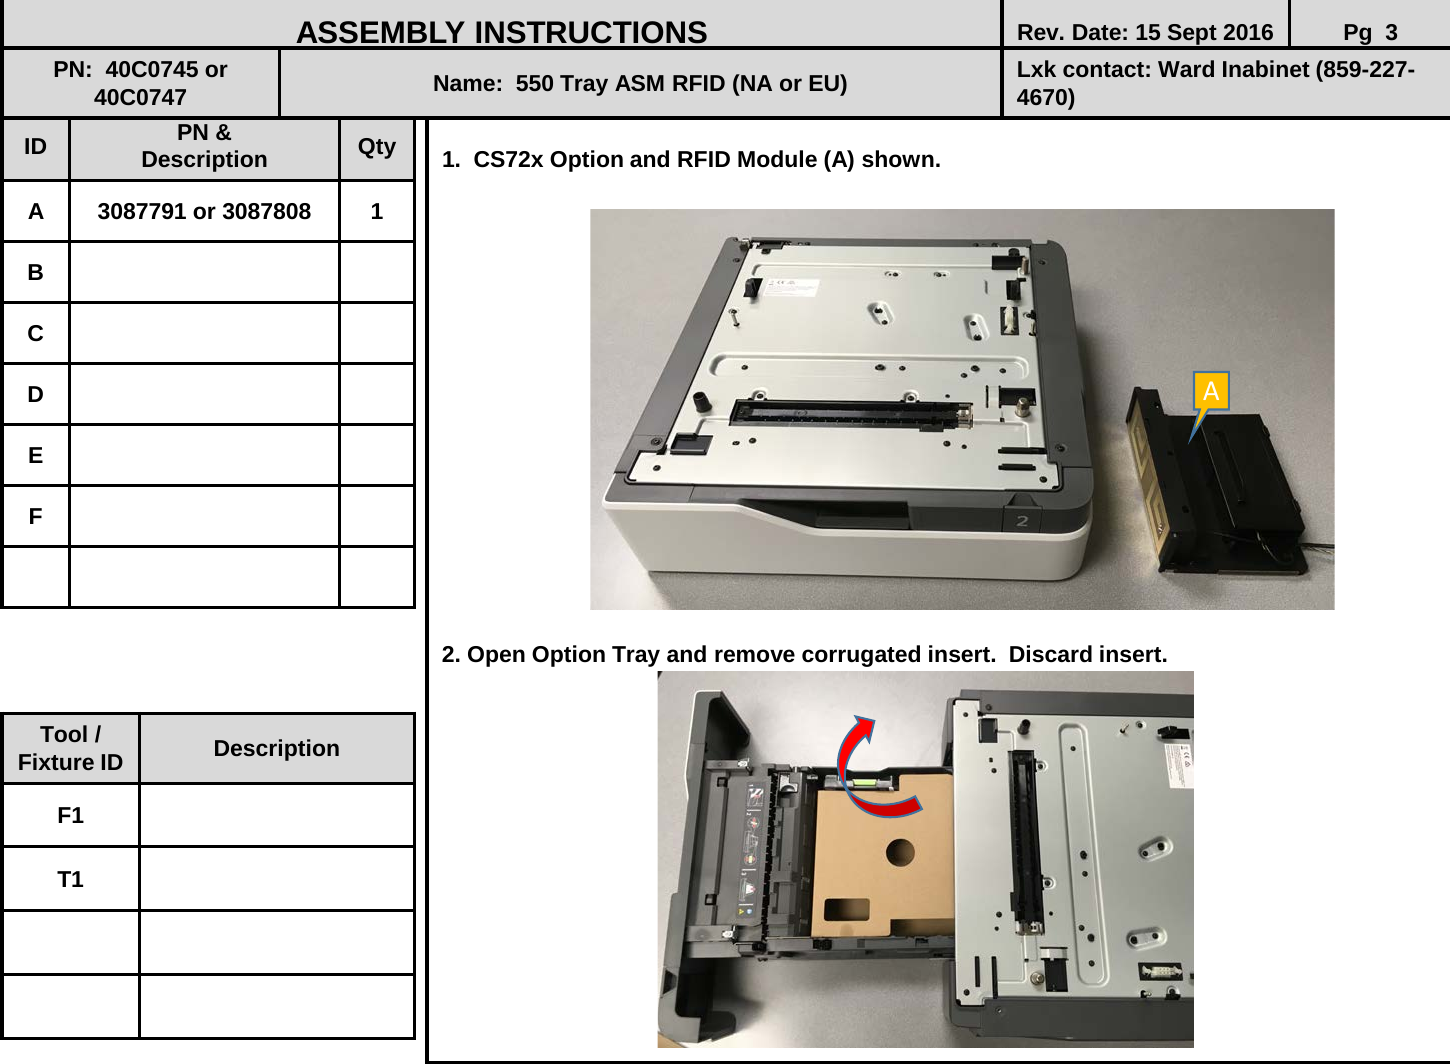  1.  CS72x Option and RFID Module (A) shown.                   2. Open Option Tray and remove corrugated insert.  Discard insert.               ID PN &amp; Description Qty A  3087791 or 3087808  1 B C D E F ASSEMBLY INSTRUCTIONS Rev. Date: 15 Sept 2016 Pg  3 PN:  40C0745 or 40C0747 Name:  550 Tray ASM RFID (NA or EU) Lxk contact: Ward Inabinet (859-227-4670) Tool / Fixture ID Description F1 T1 A 